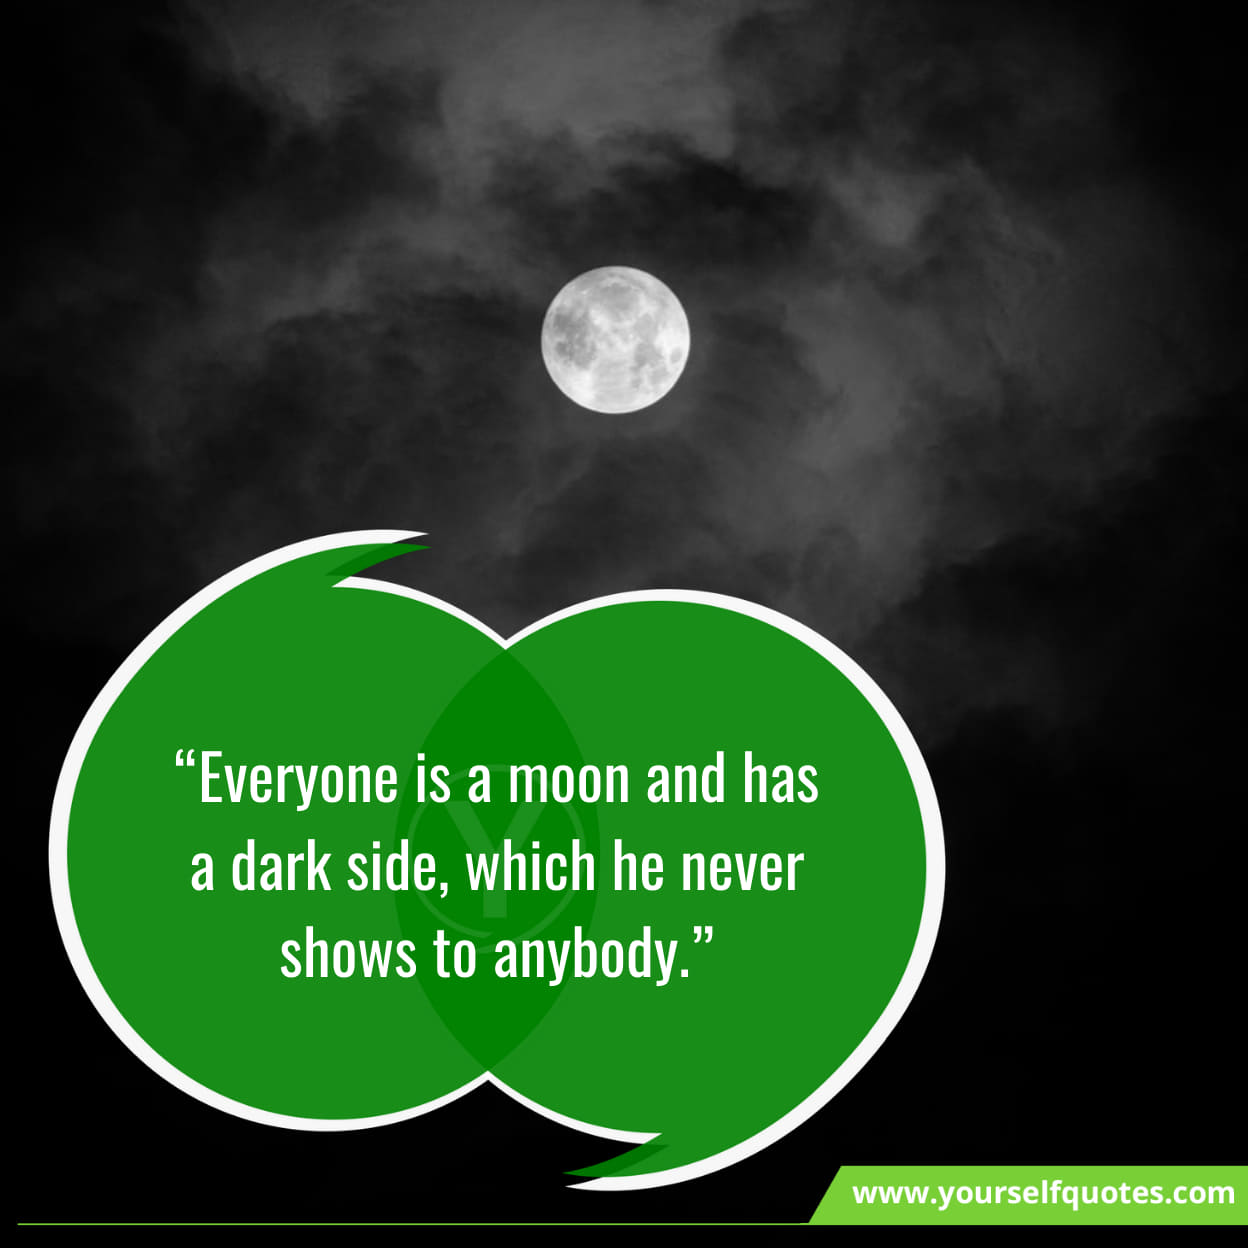 Moon Day Quotes